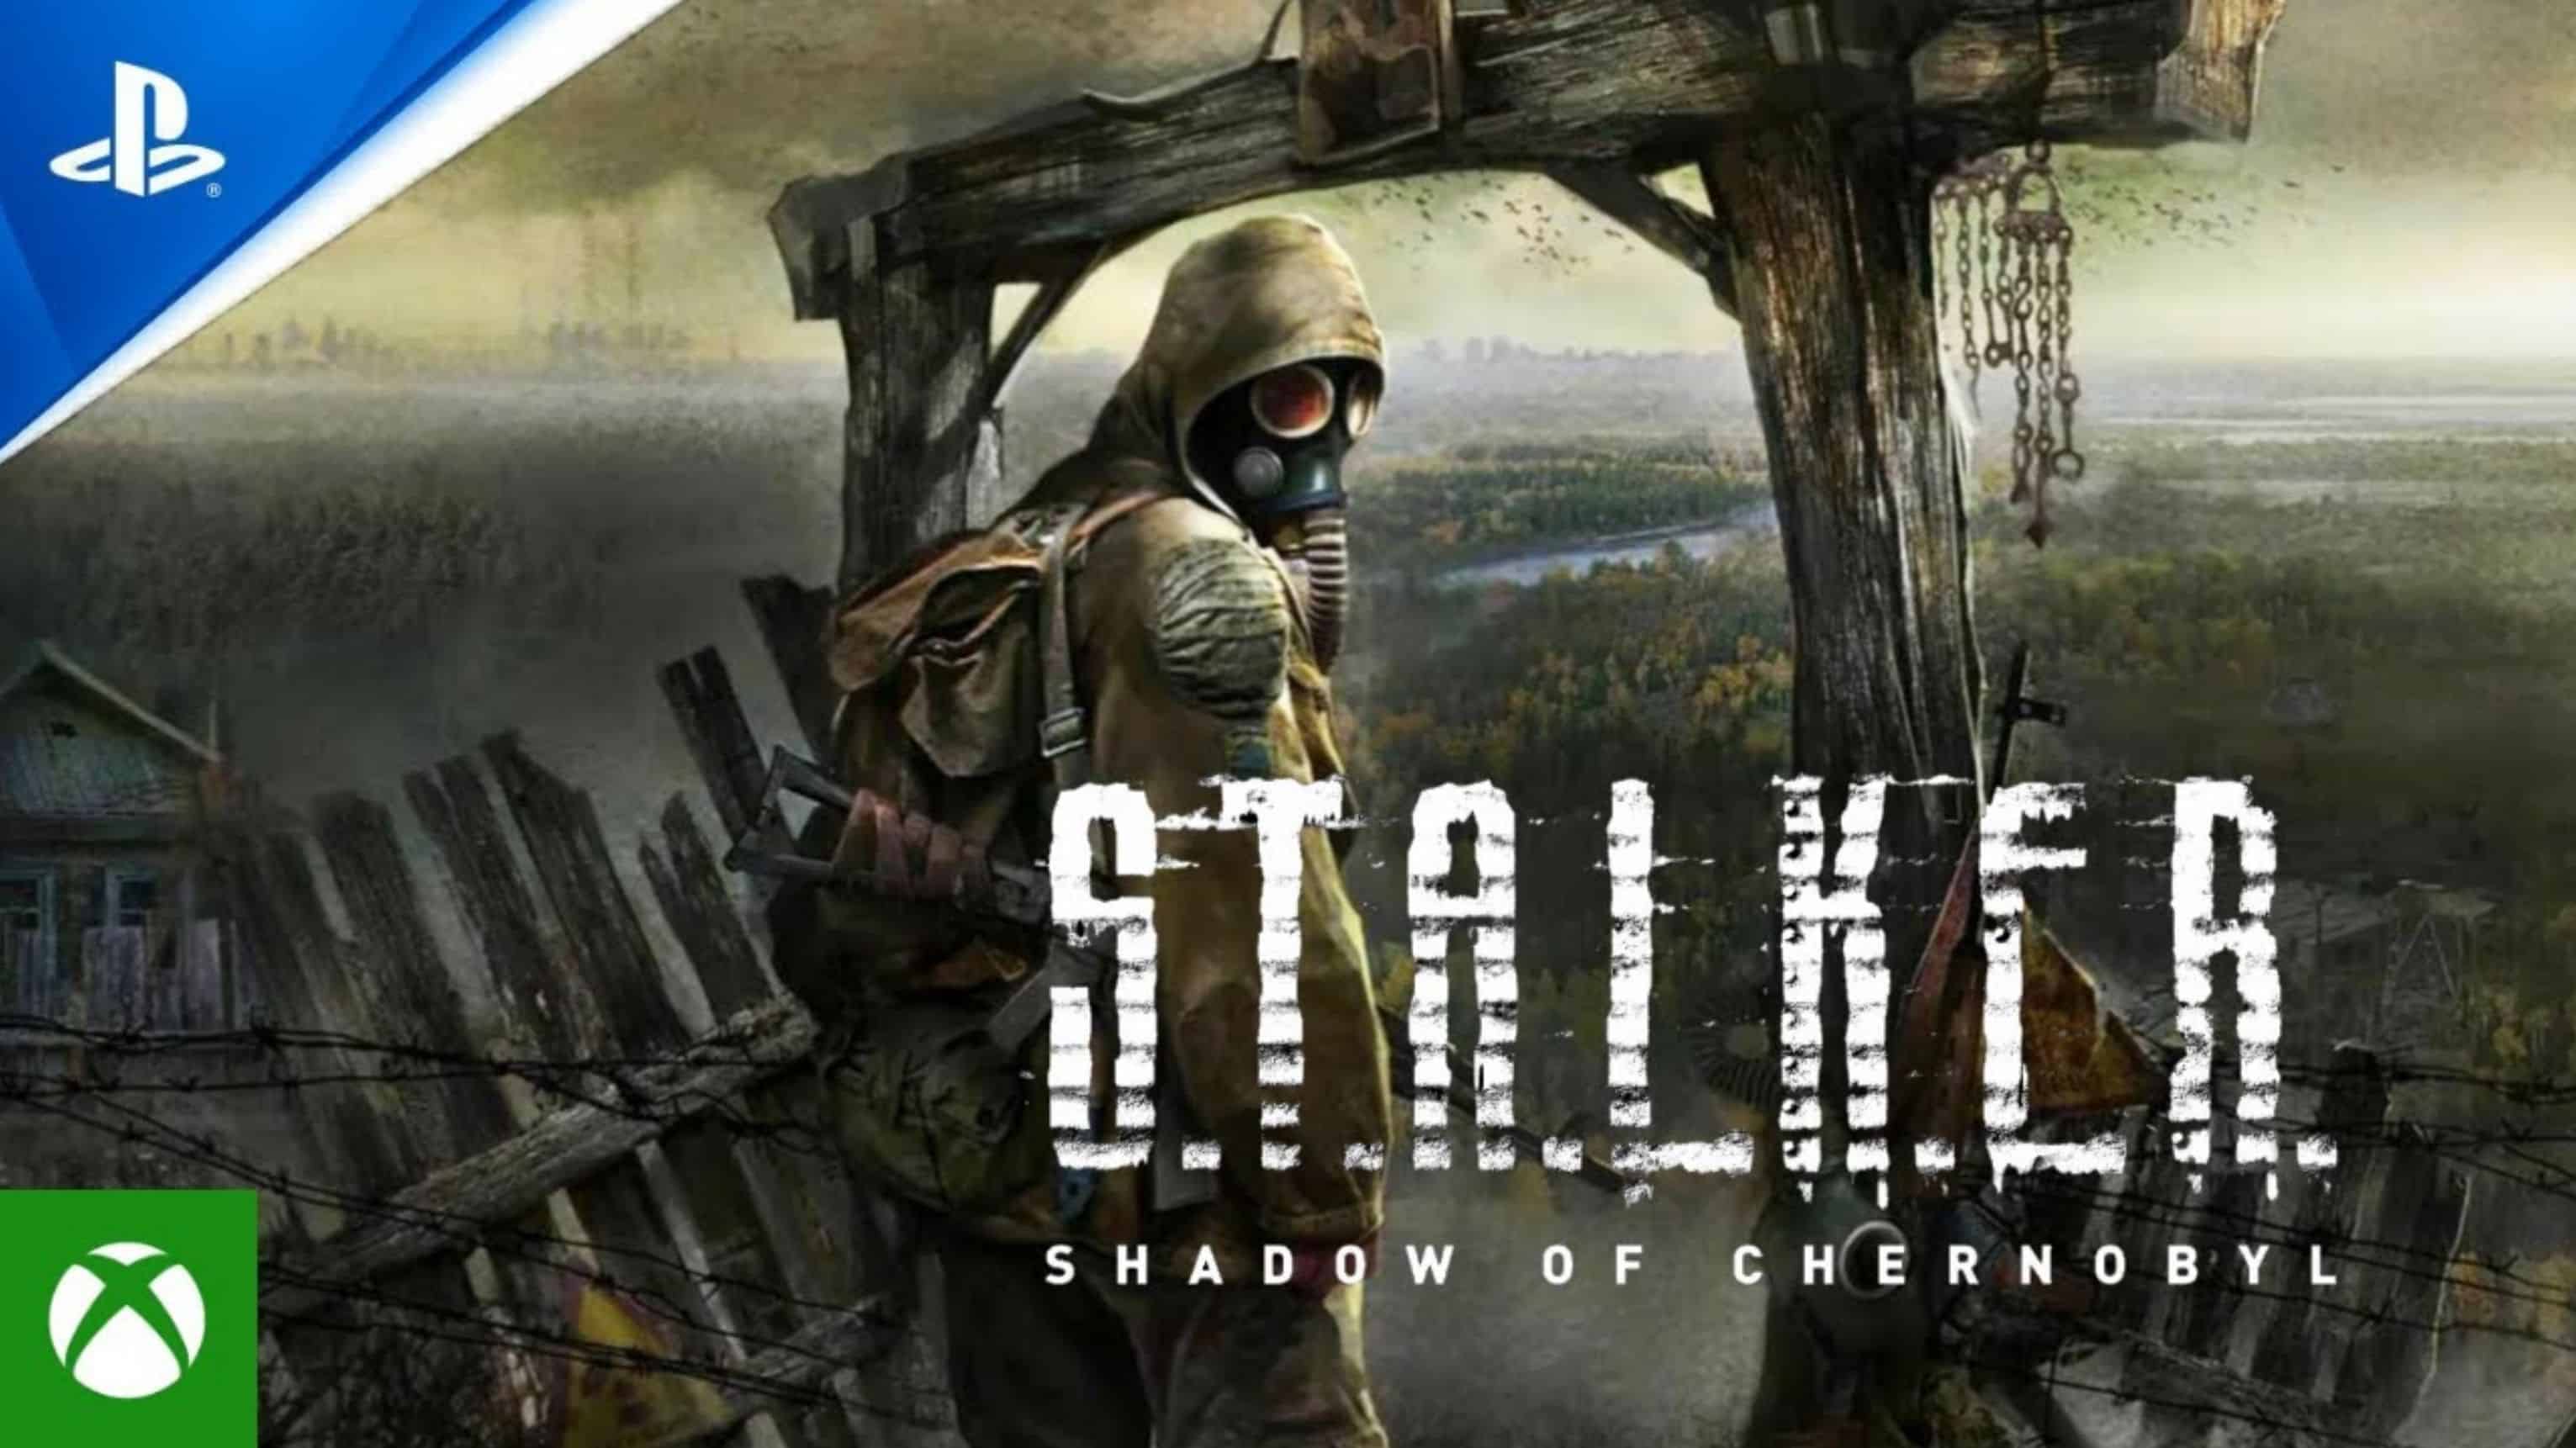 Is Stalker 2 Coming To PS5 and PS4? - PlayStation Universe